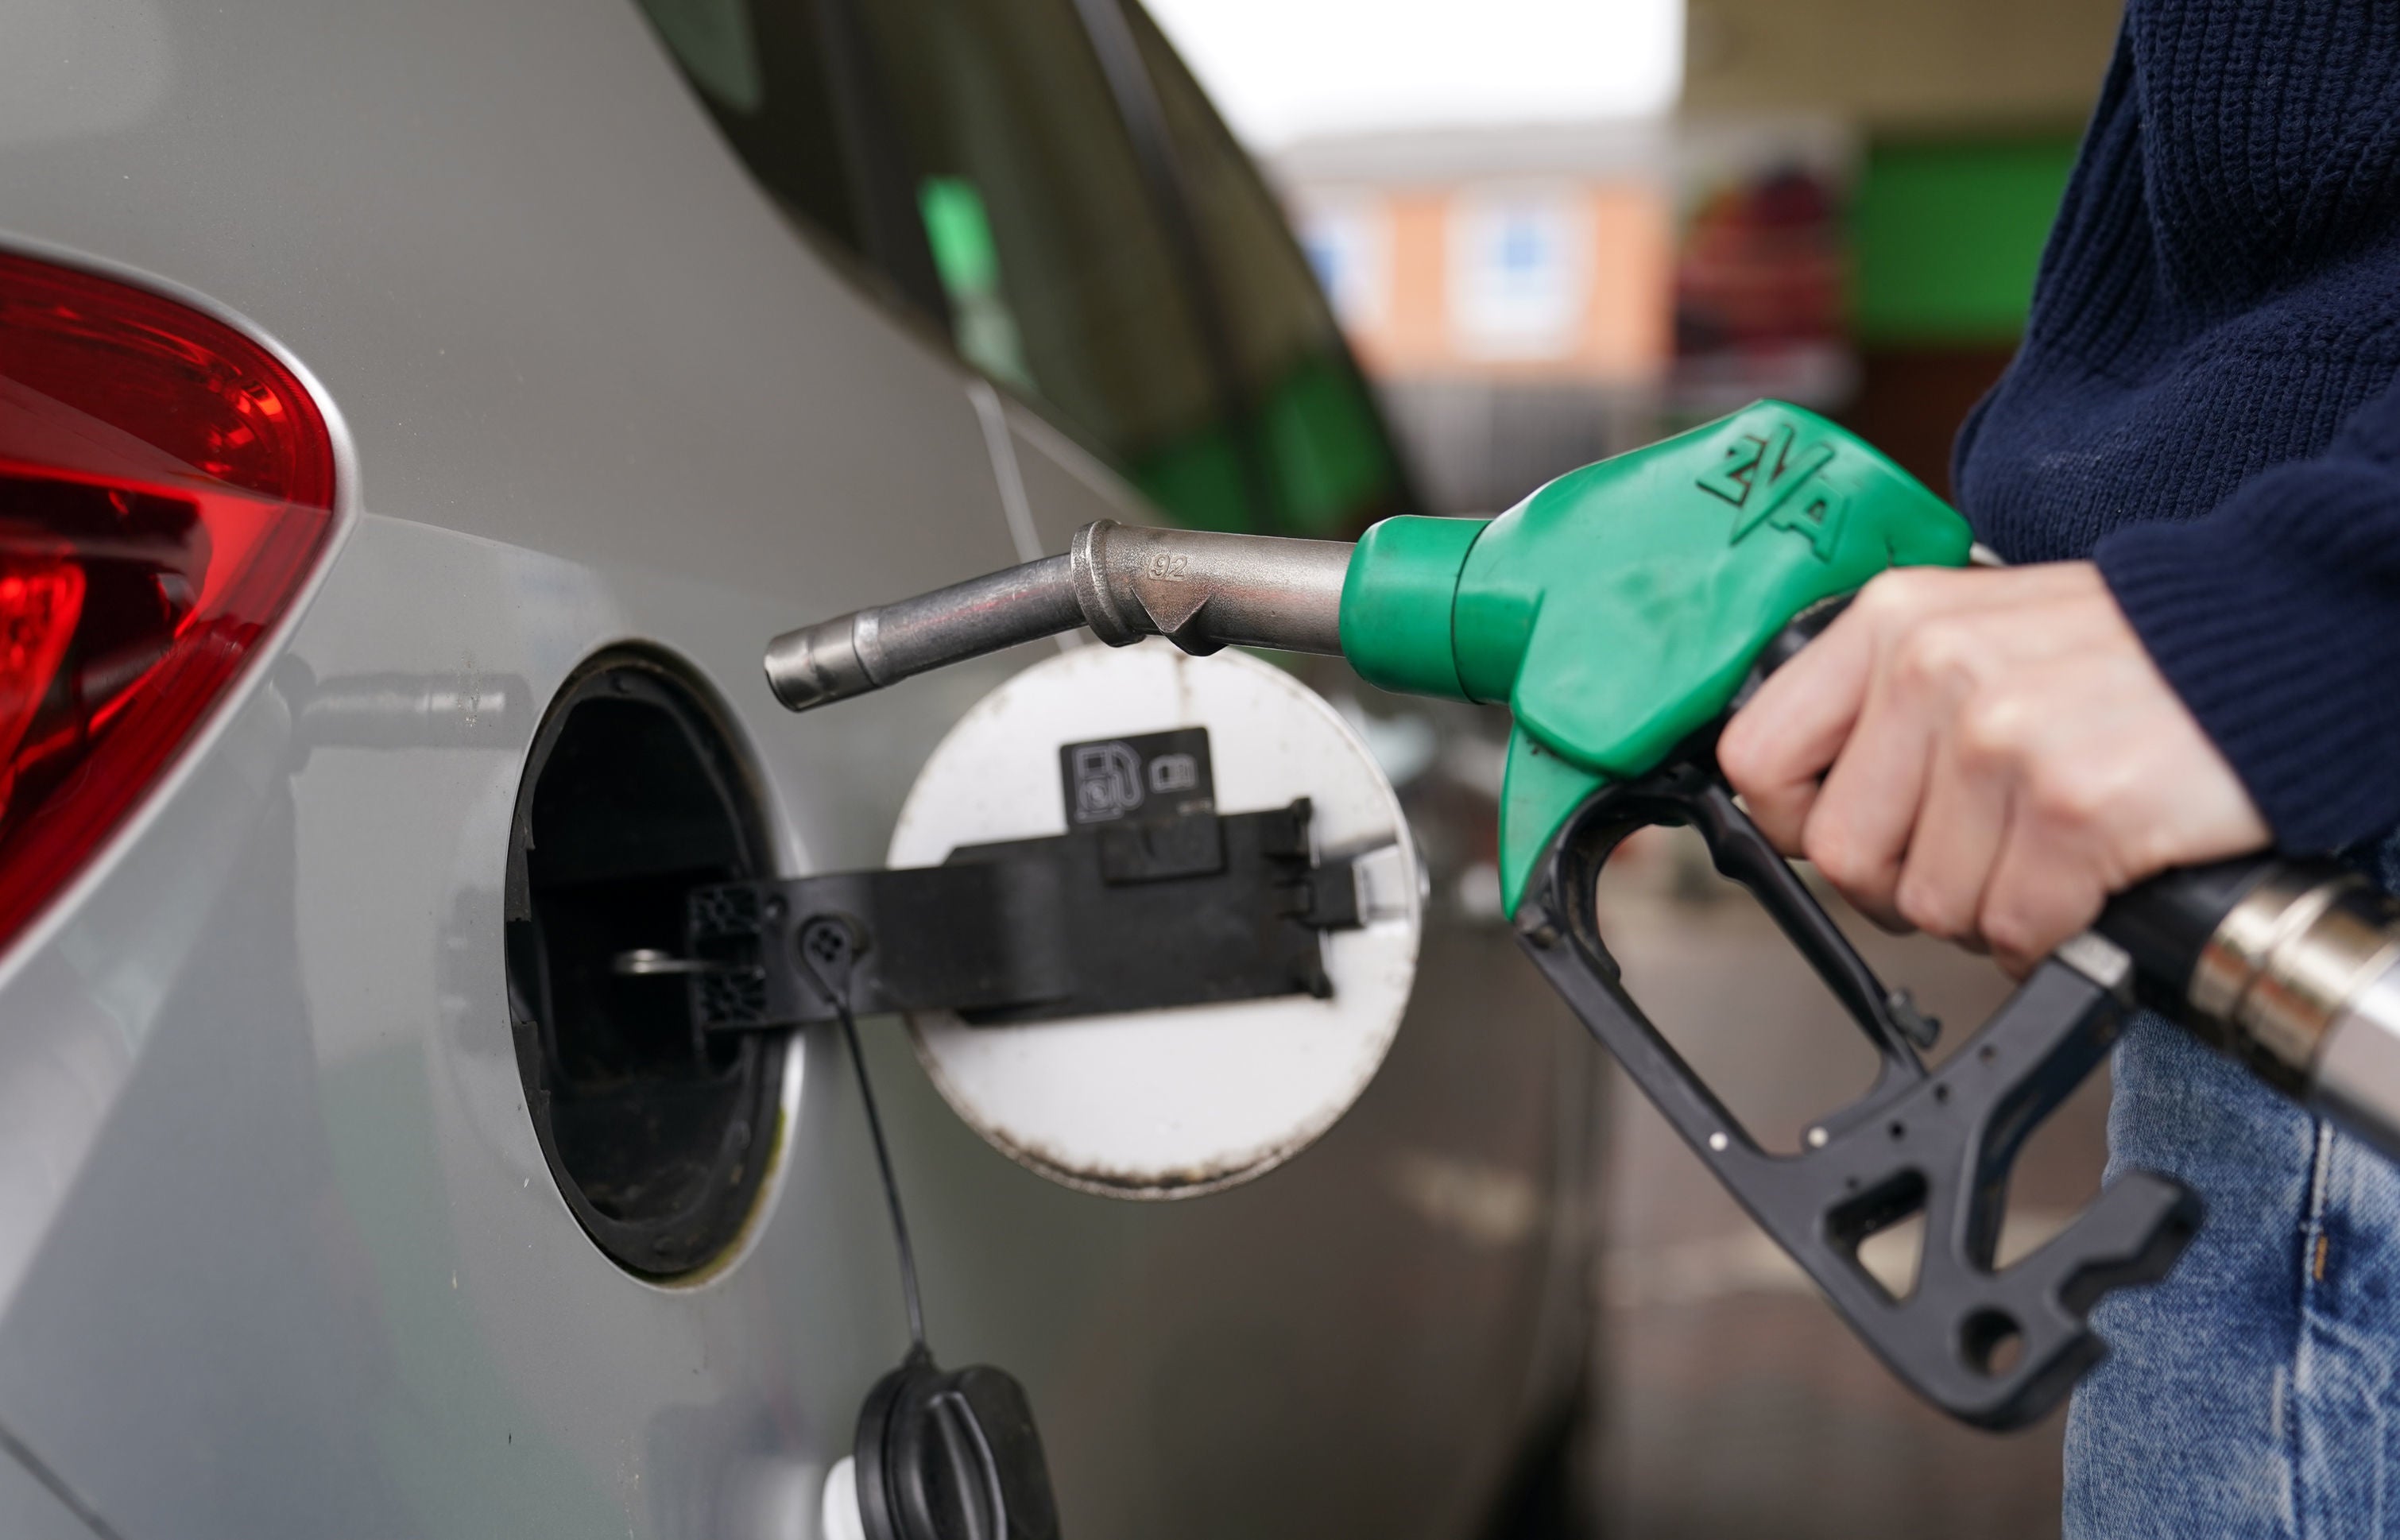 Petrol prices at forecourts hit nearly £2 per litre last June